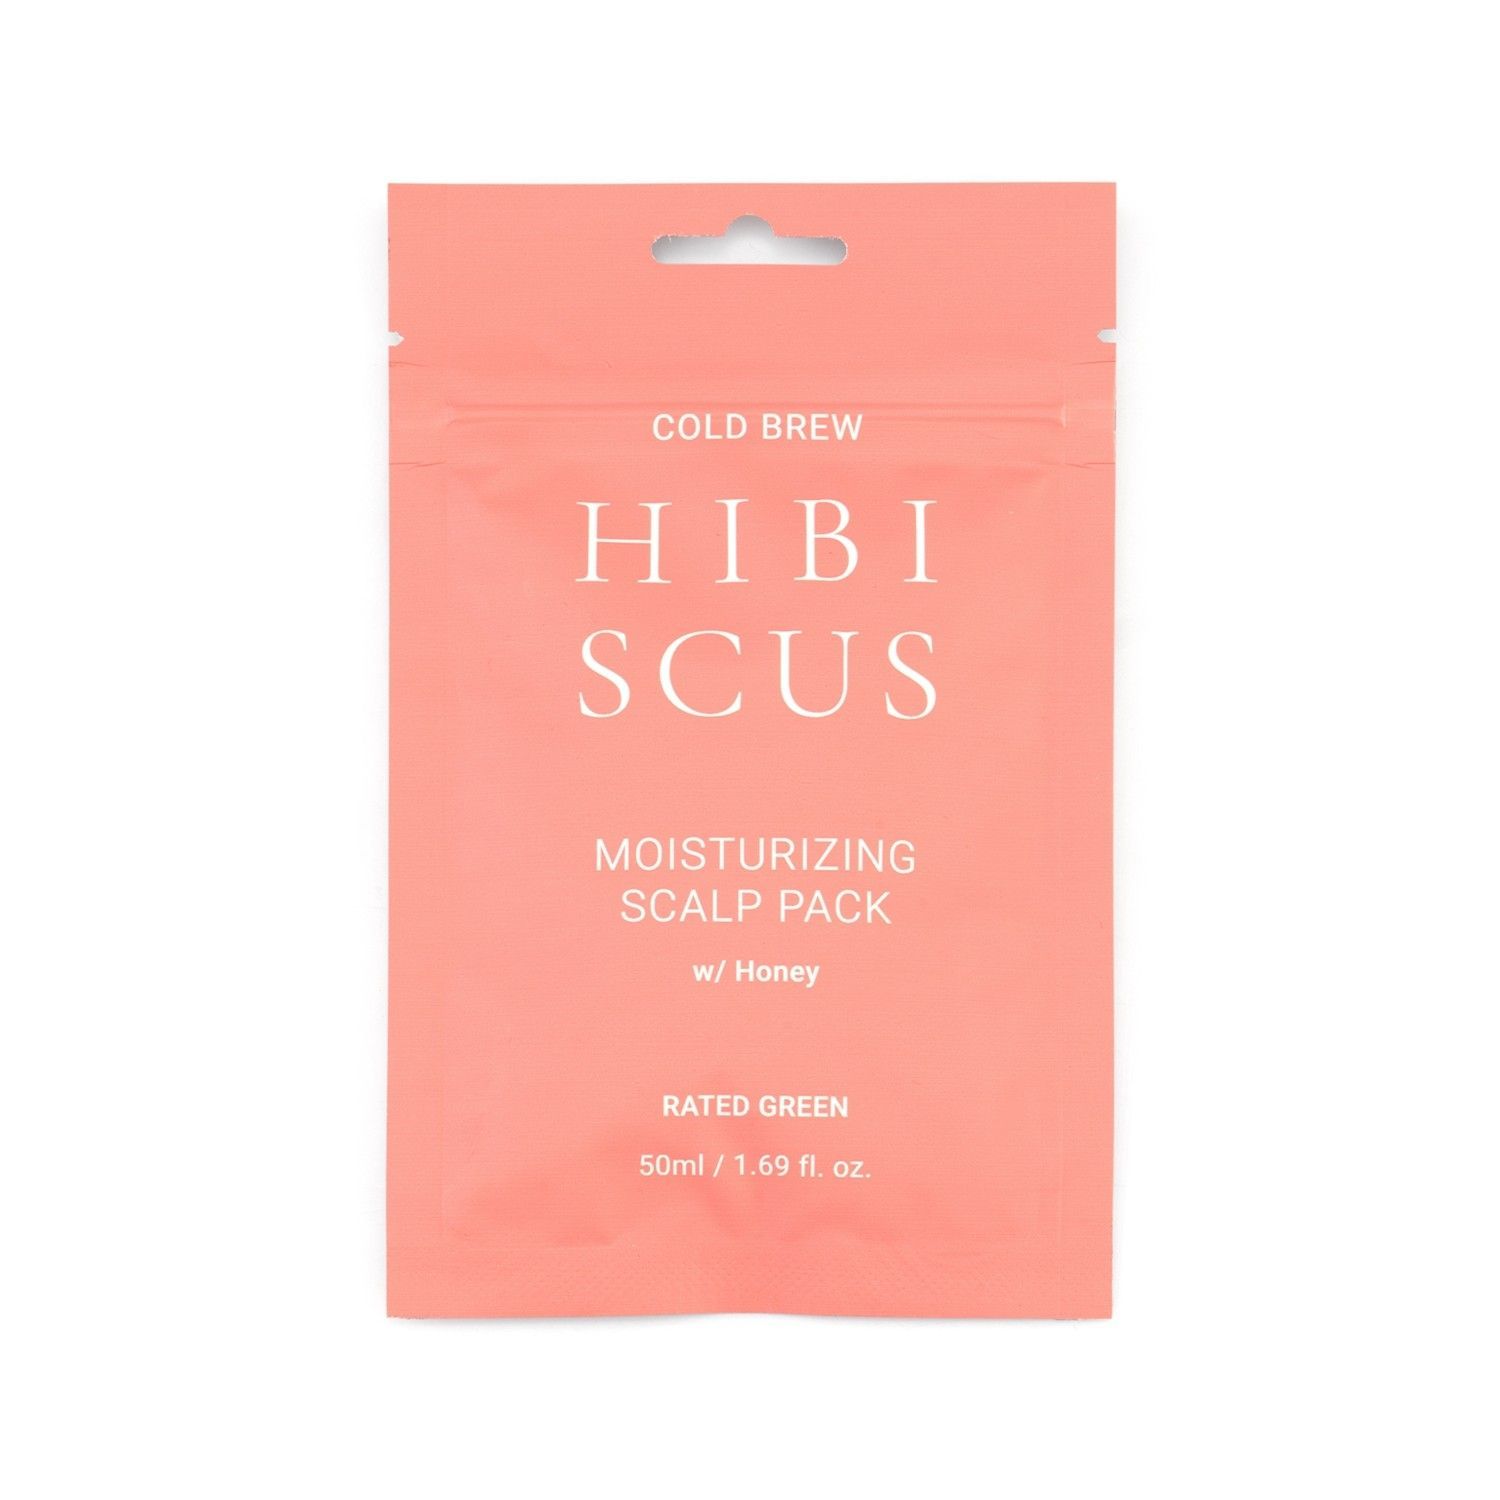 RATED GREEN Cold Brew Hibiscus Moisturizing Scalp Pack